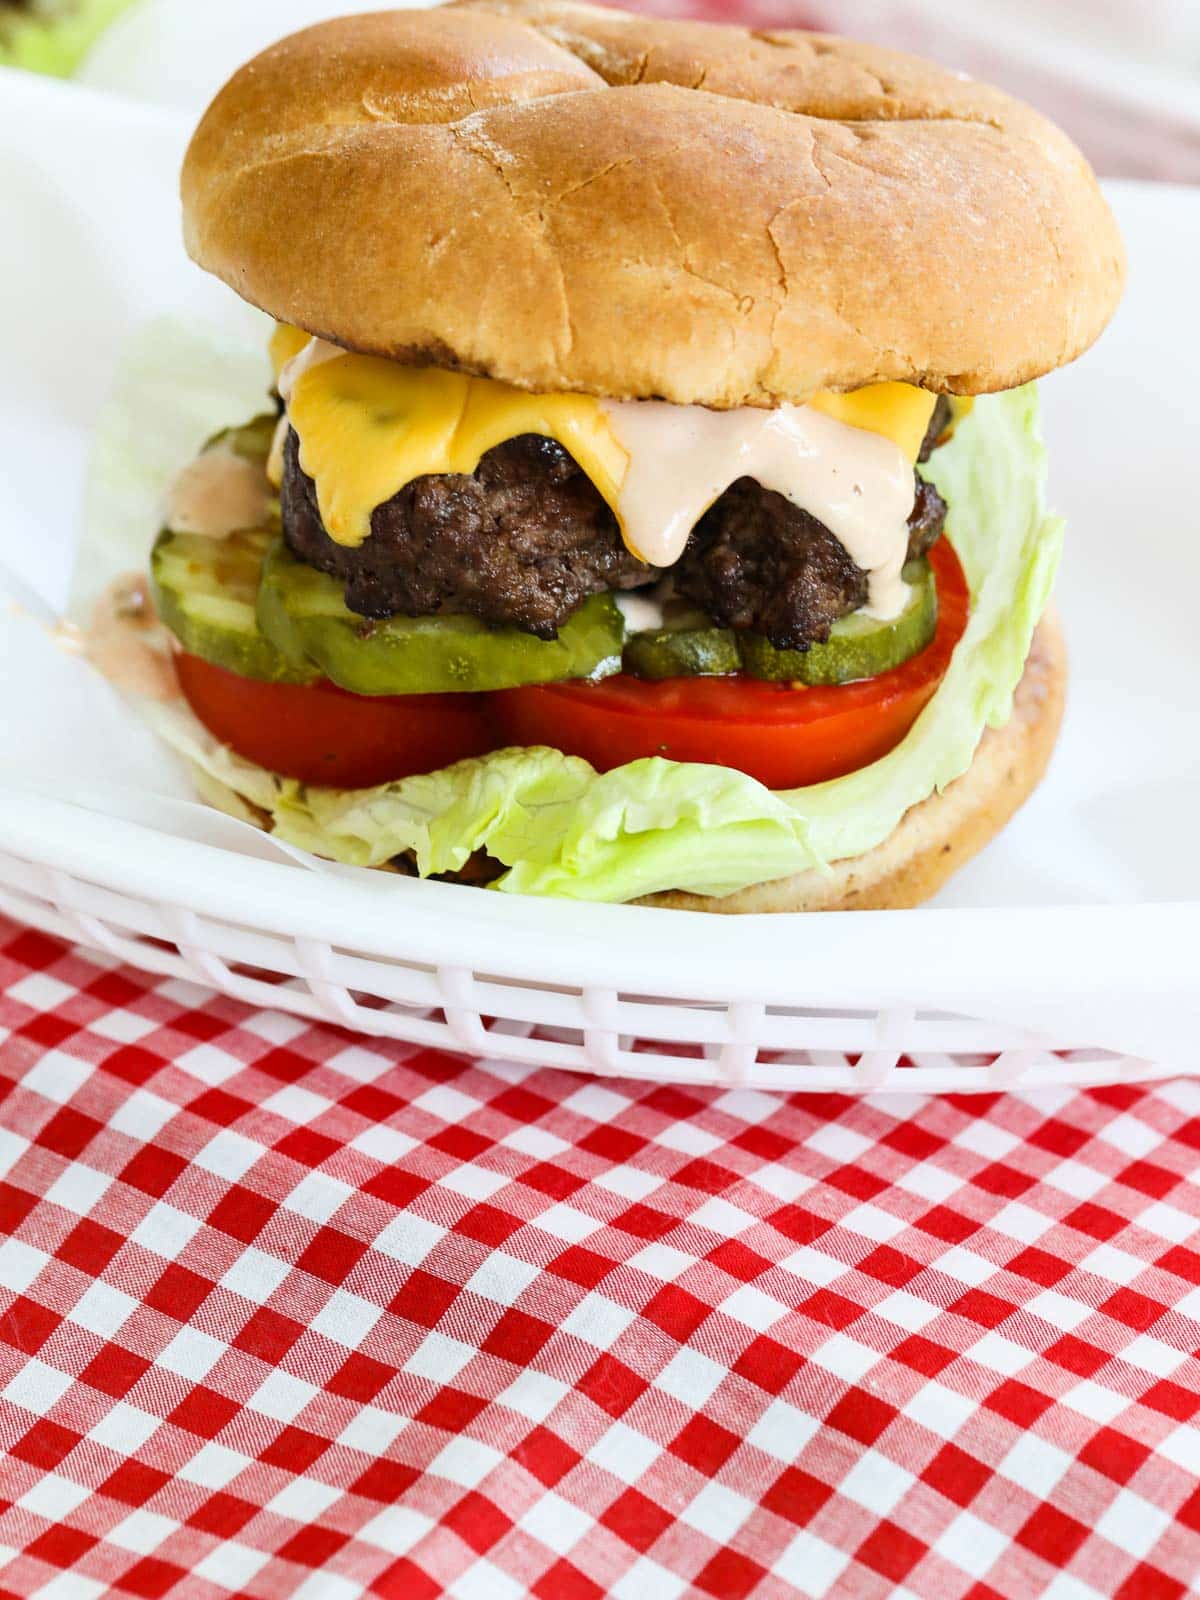 A grilled hamburger in a white food basket with cheese, lettuce, and tomato.